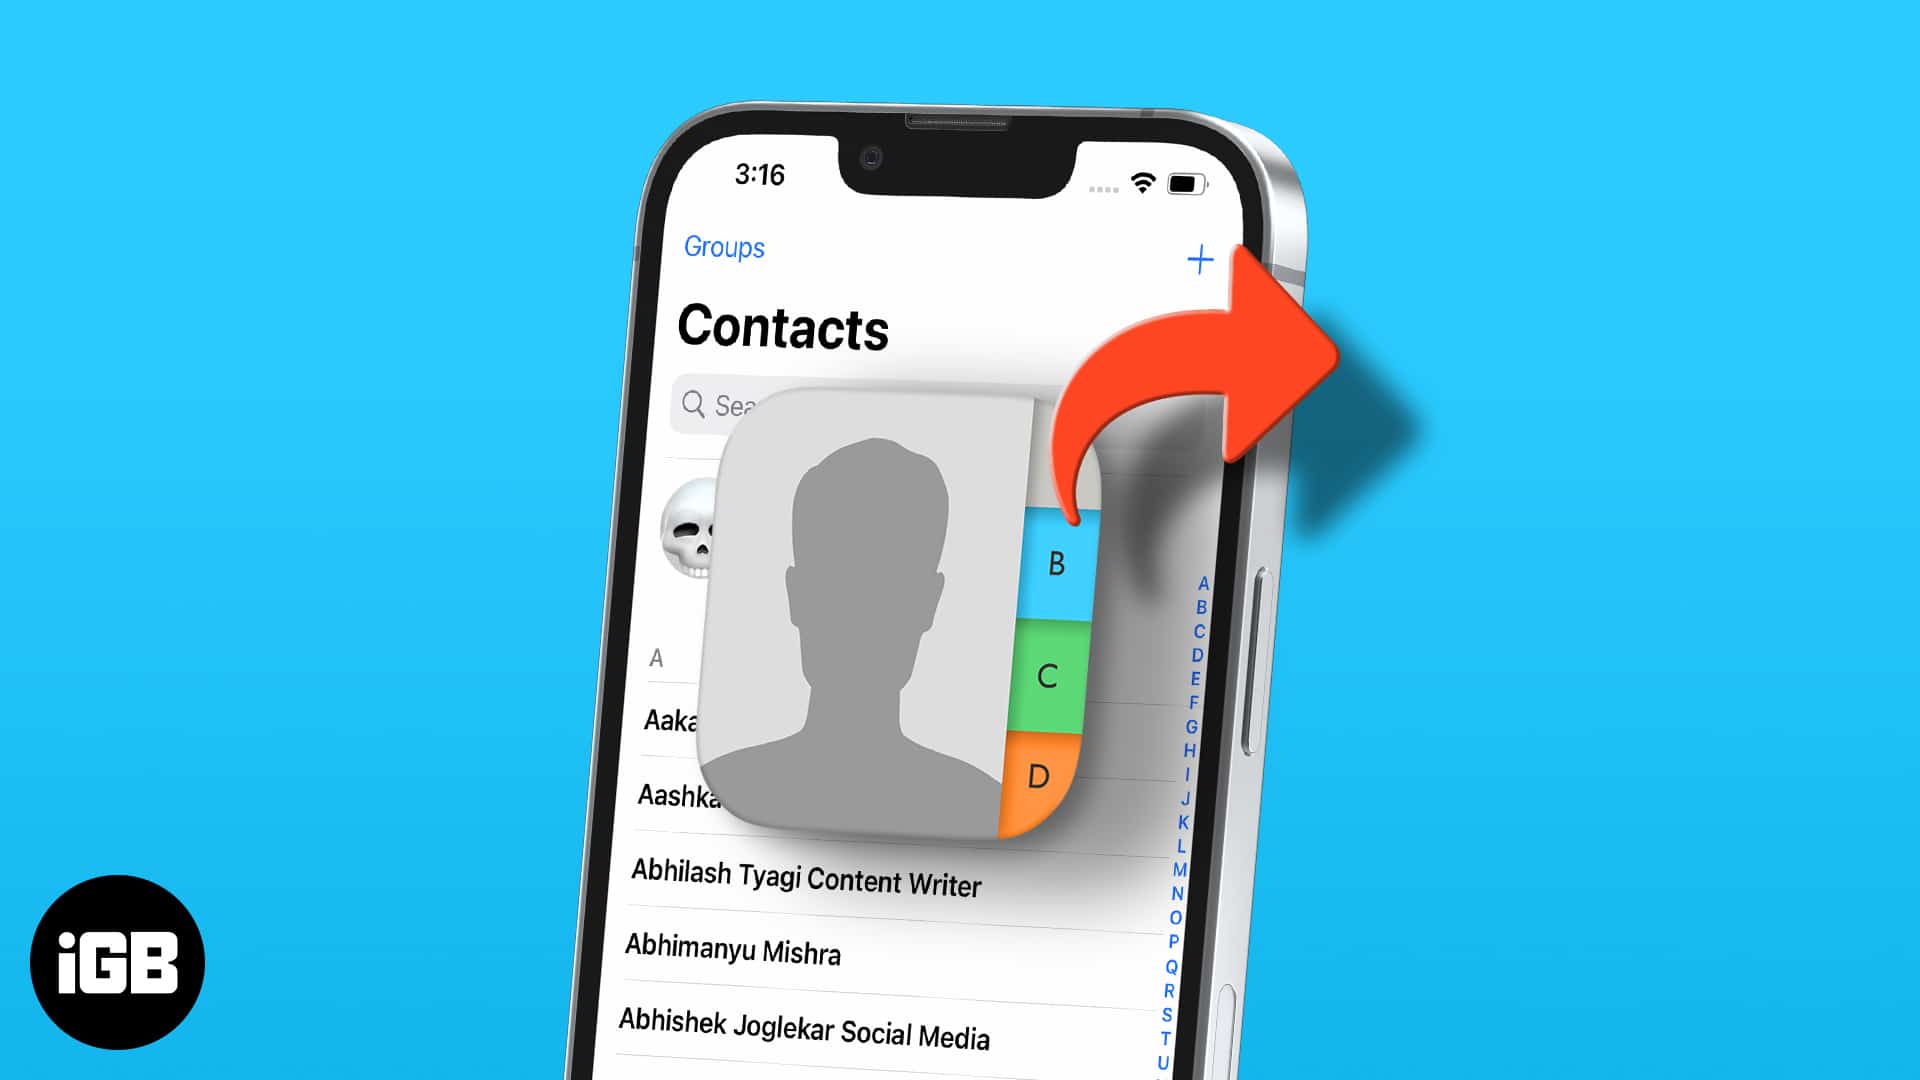 How to share contacts on iphone